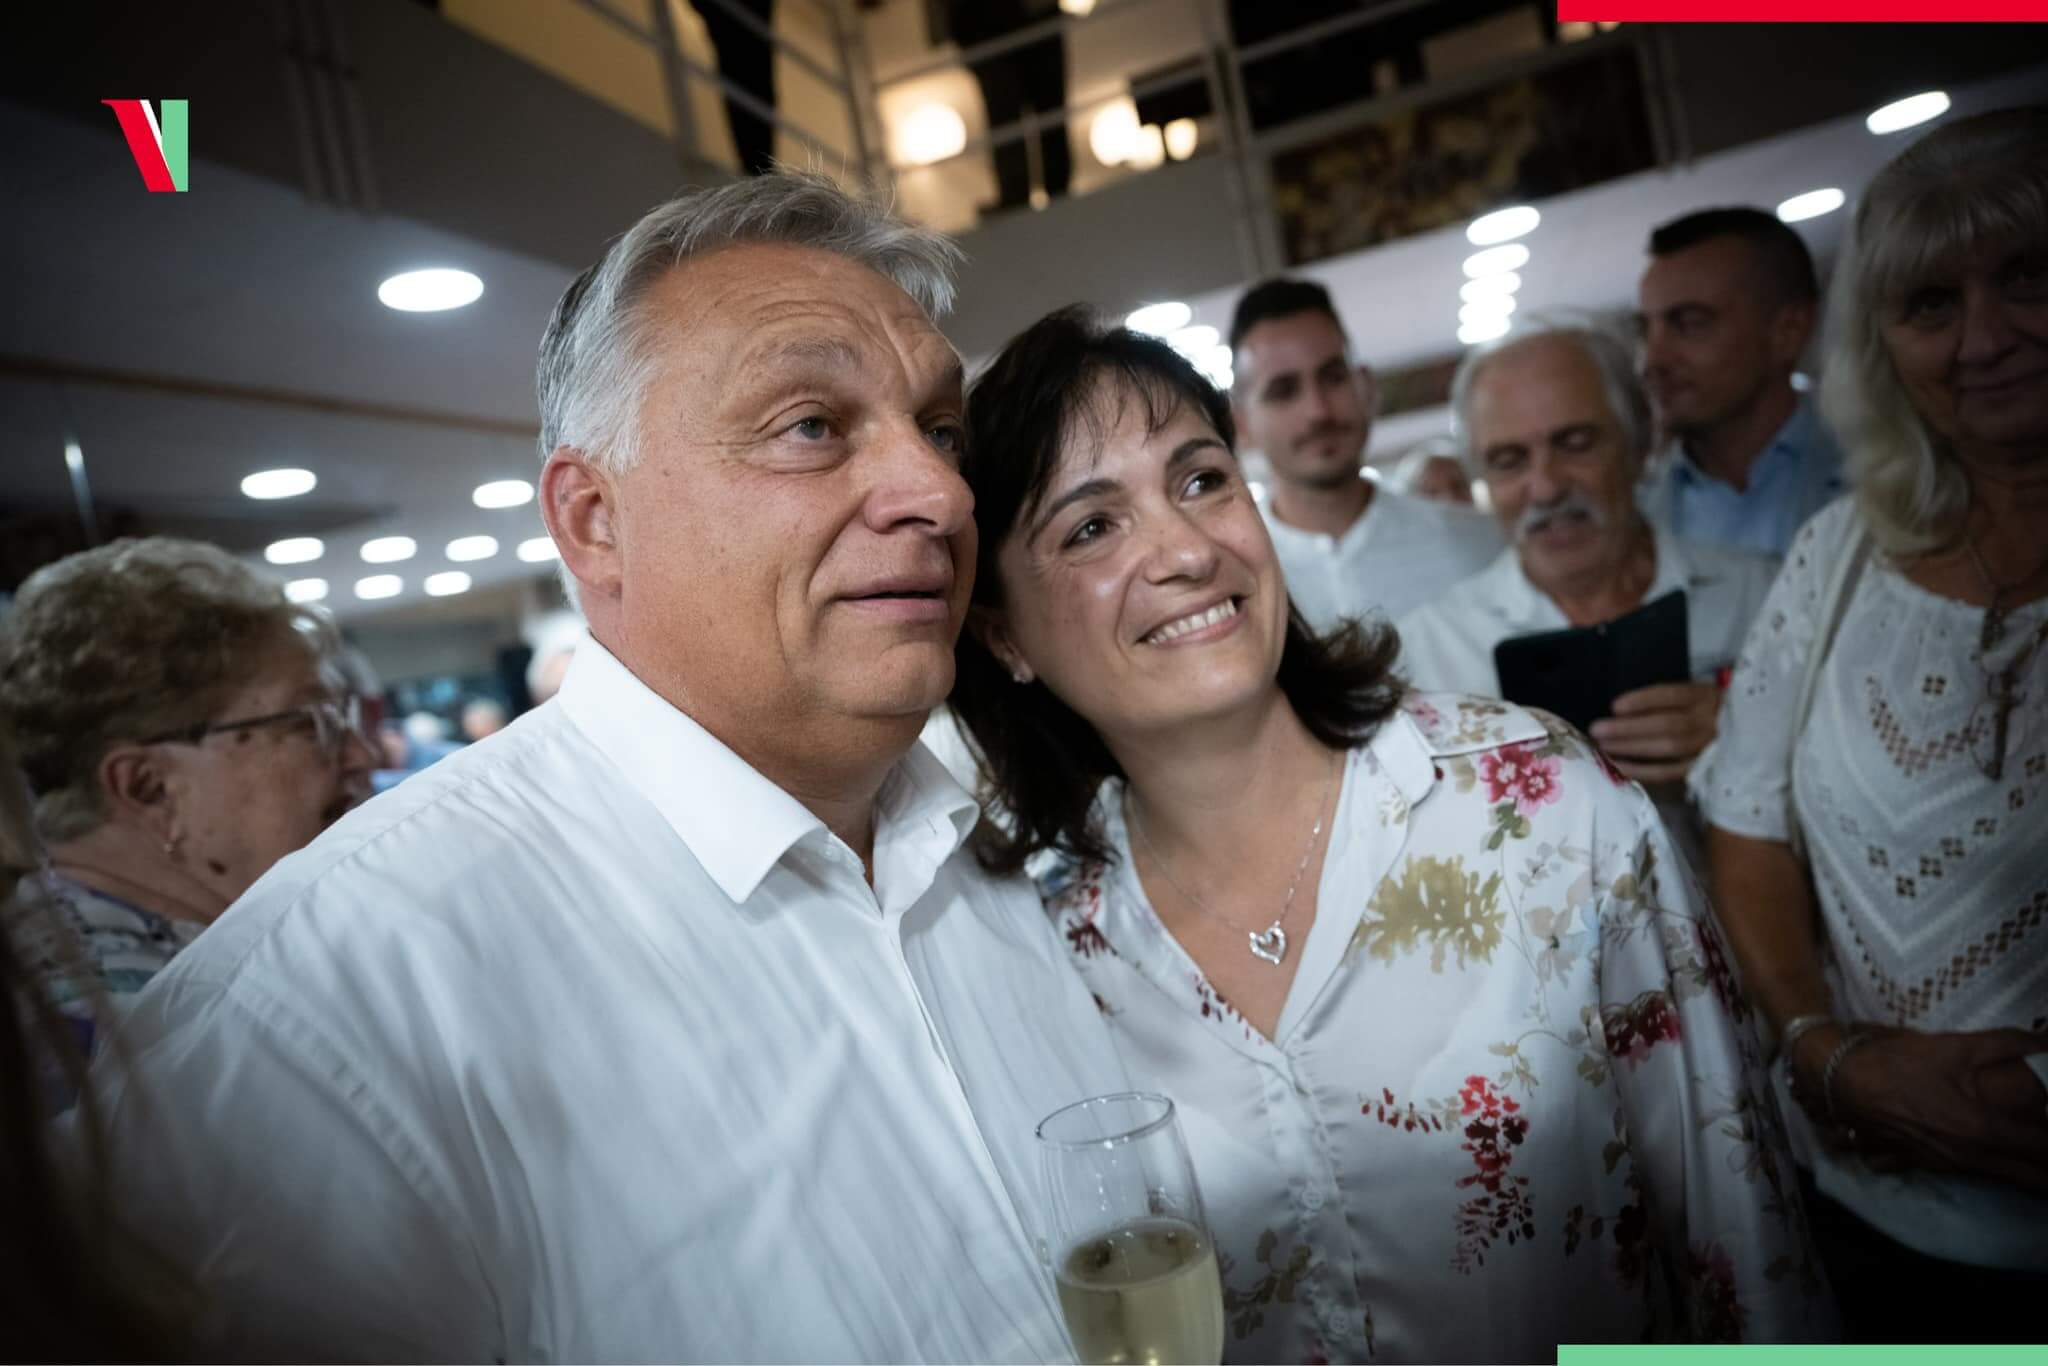 'Civic Circles' Key to Hungary's Current Success & Strength, Says Orbán